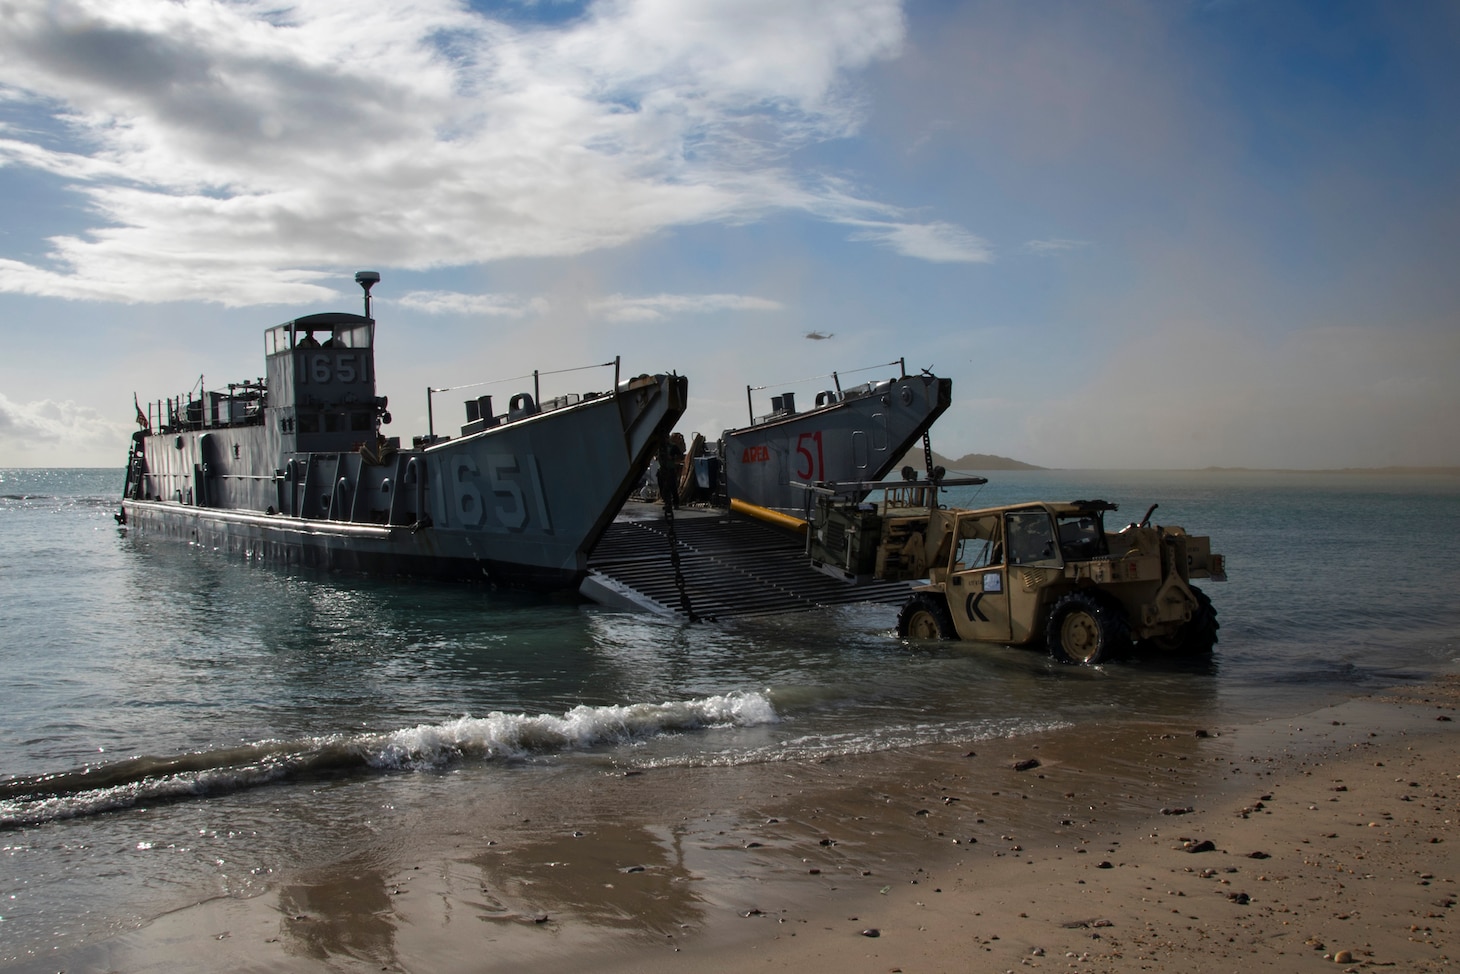 170713-N-WF272-551 TOWNSHEND ISLAND, Australia (July 13, 2017) Sailors and Marines onboard Landing Craft Utility (LCU) 1651, assigned to Naval Beach Unit (NBU) 7, offload equipment as part of large-scale amphibious assault during Talisman Saber 17. The LCU, launched from the amphibious dock landing ship USS Ashland (LSD 48), enabled movement of 31st Marine Expeditionary Unit (MEU) forces and equipment ashore in order for the MEU to complete mission objectives in tandem with Australian counterparts. (U.S. Navy video by Mass Communication Specialist 2nd Class Diana Quinlan/Released)